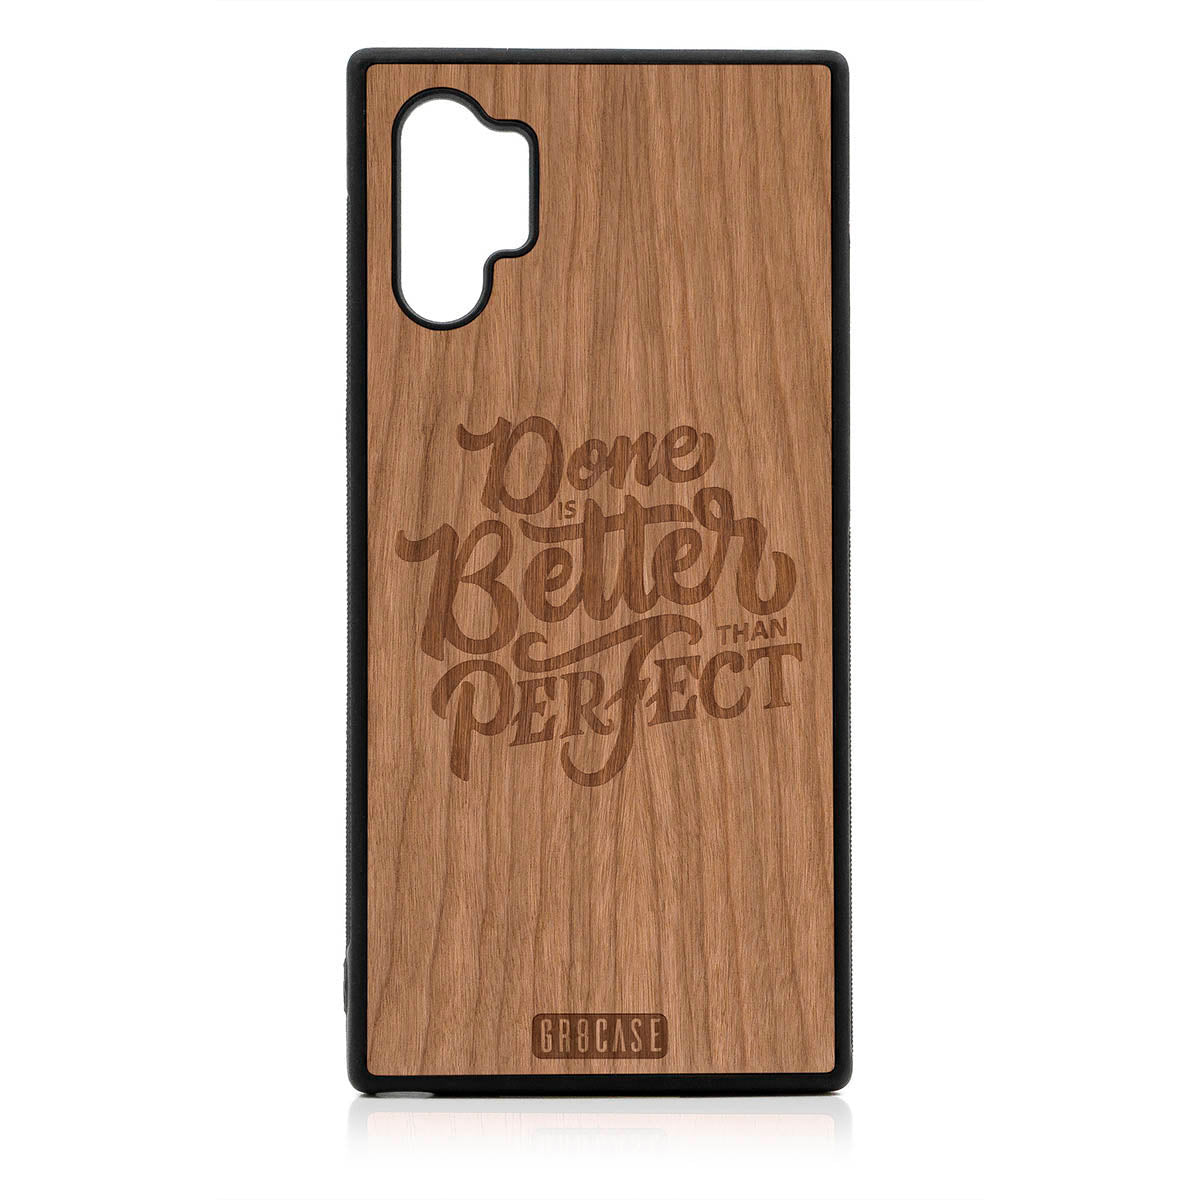 Done Is Better Than Perfect Design Wood Case For Samsung Galaxy Note 10 Plus by GR8CASE